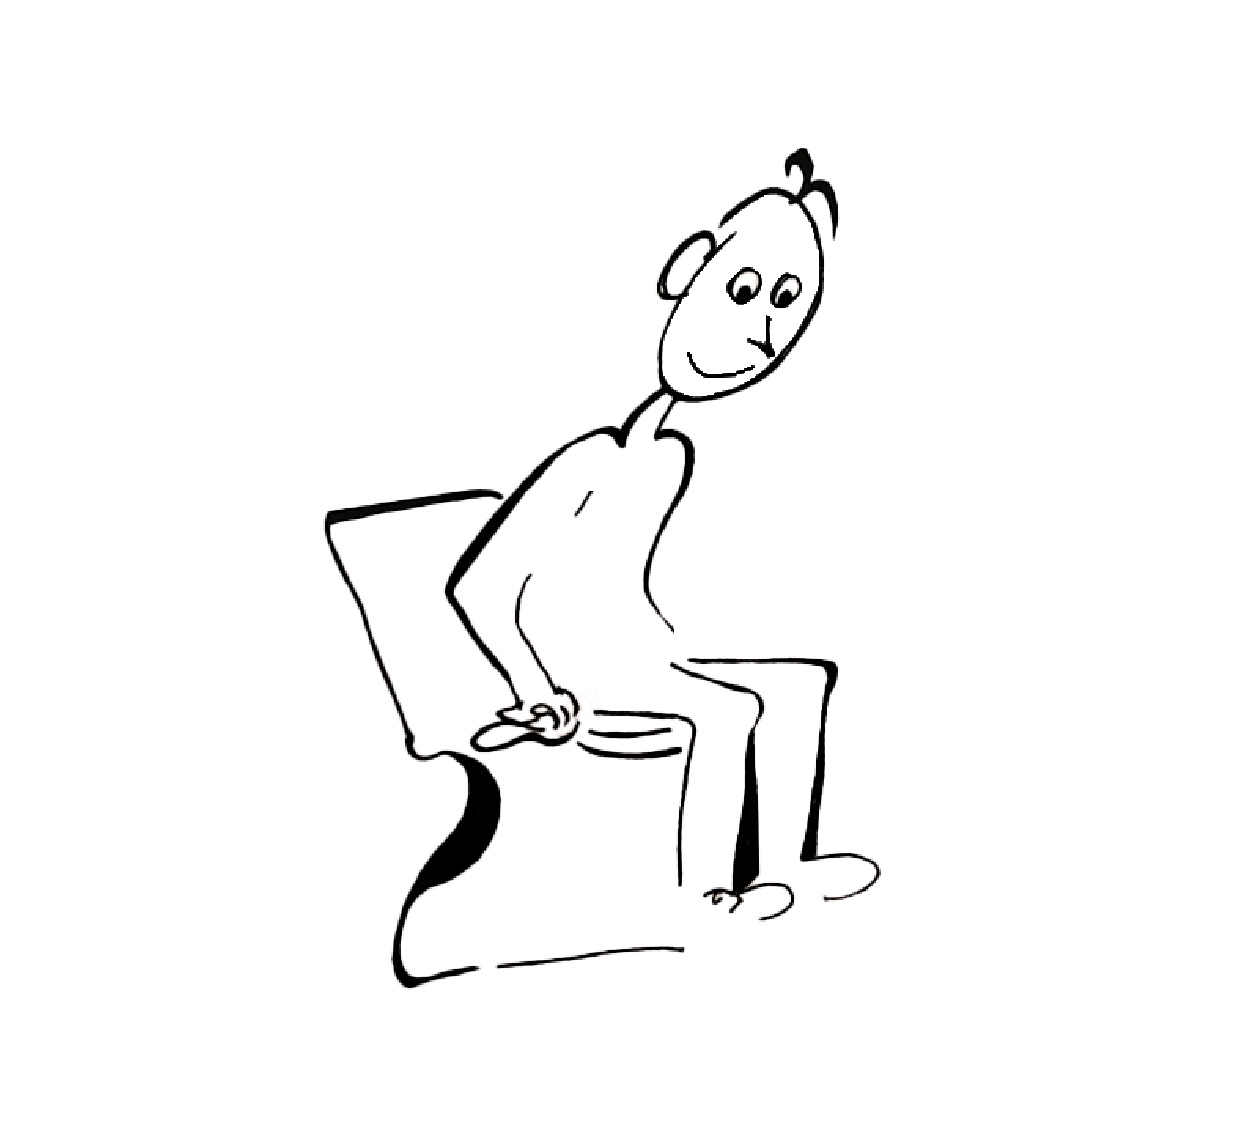 Man-On-Toilet-Drawing